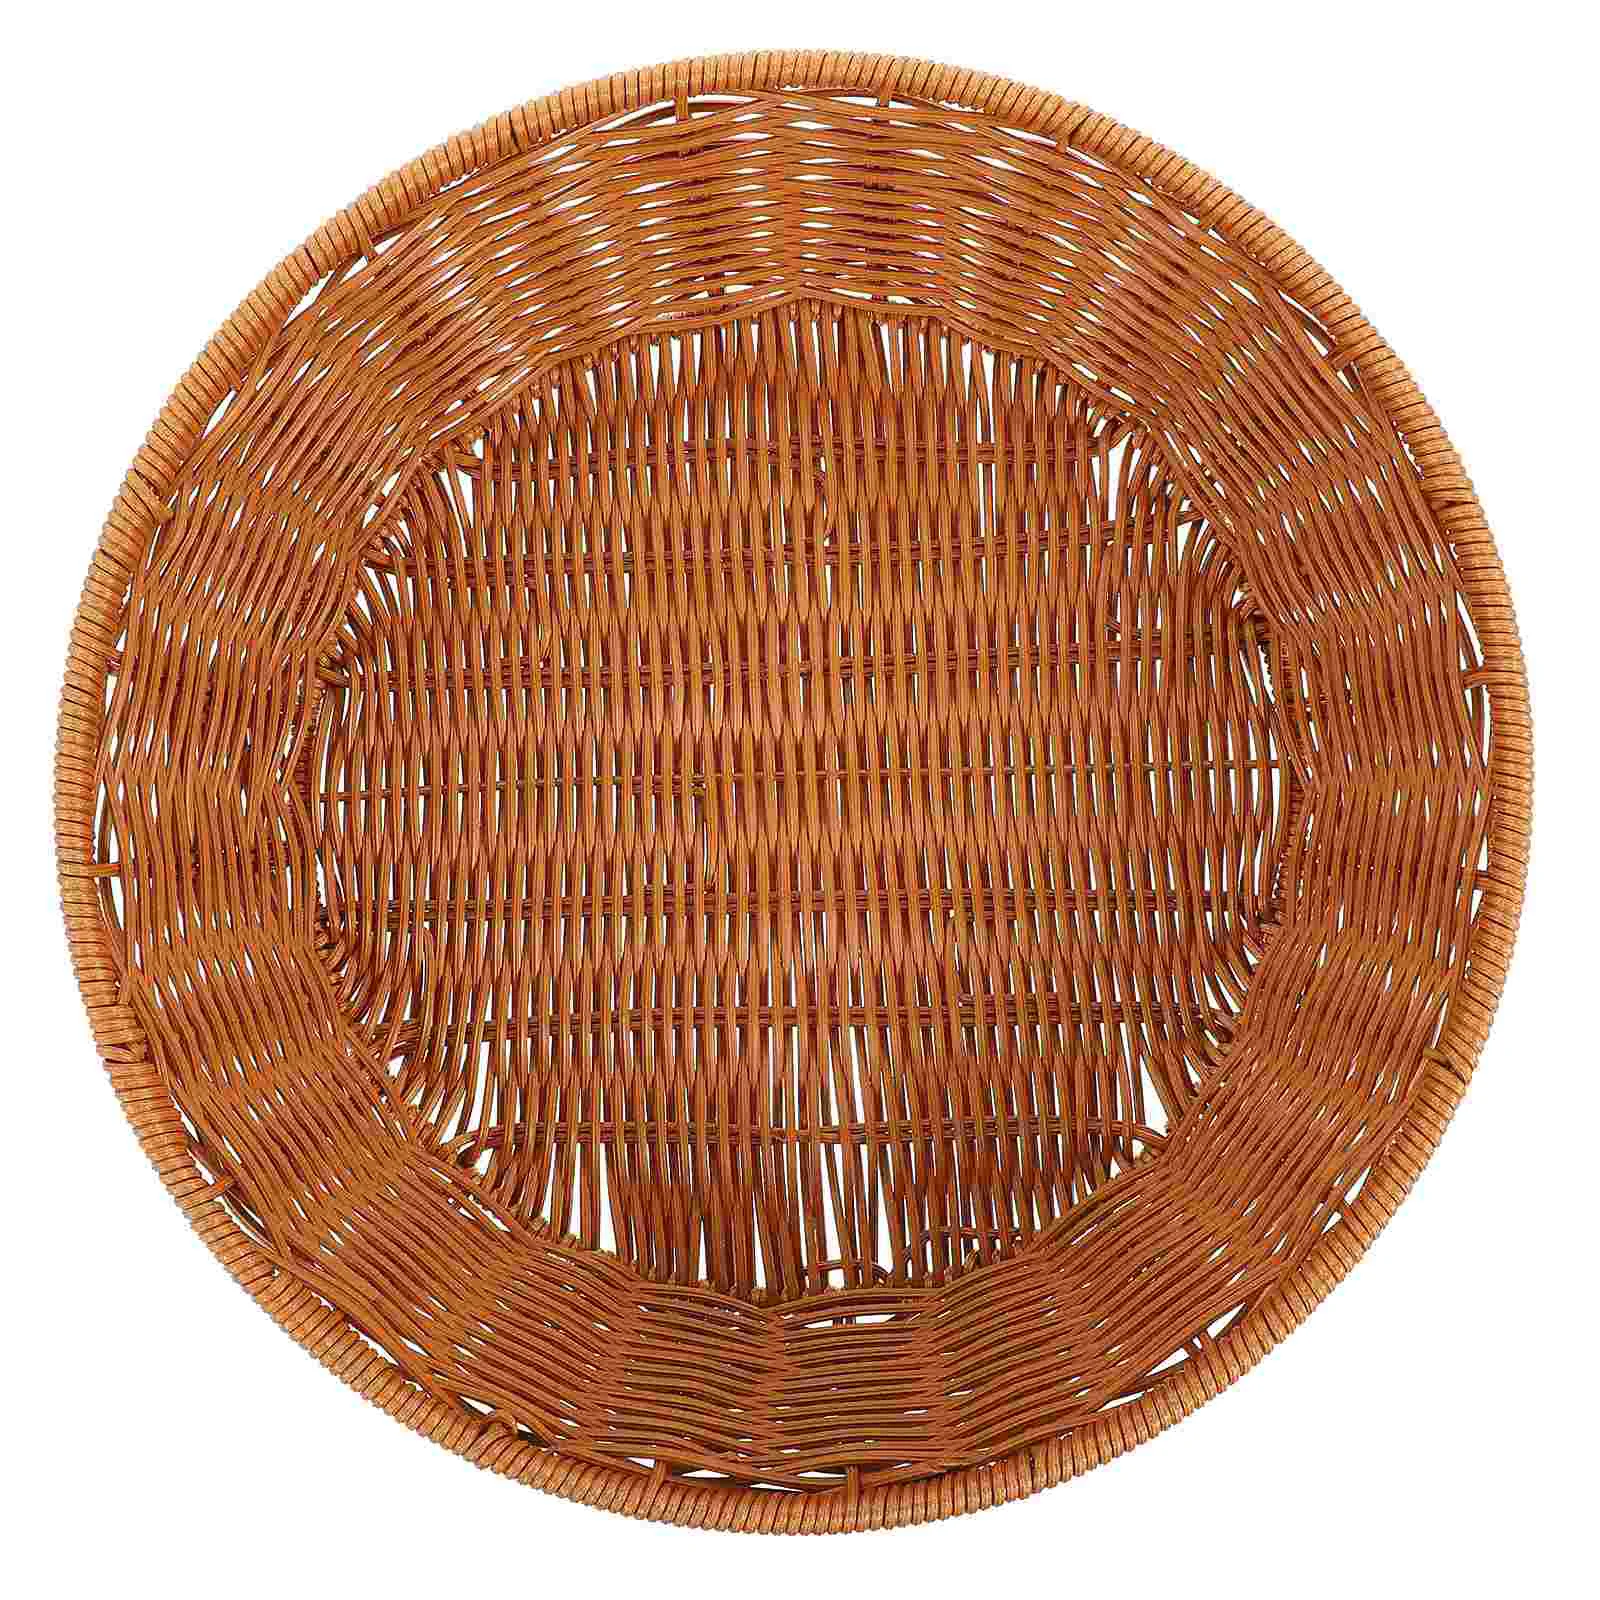 

Rattan Fruit Vegetable Plate Small Round Basket Sundries Container Seagrass Storage Baskets Household Woven Box Shelf Bread